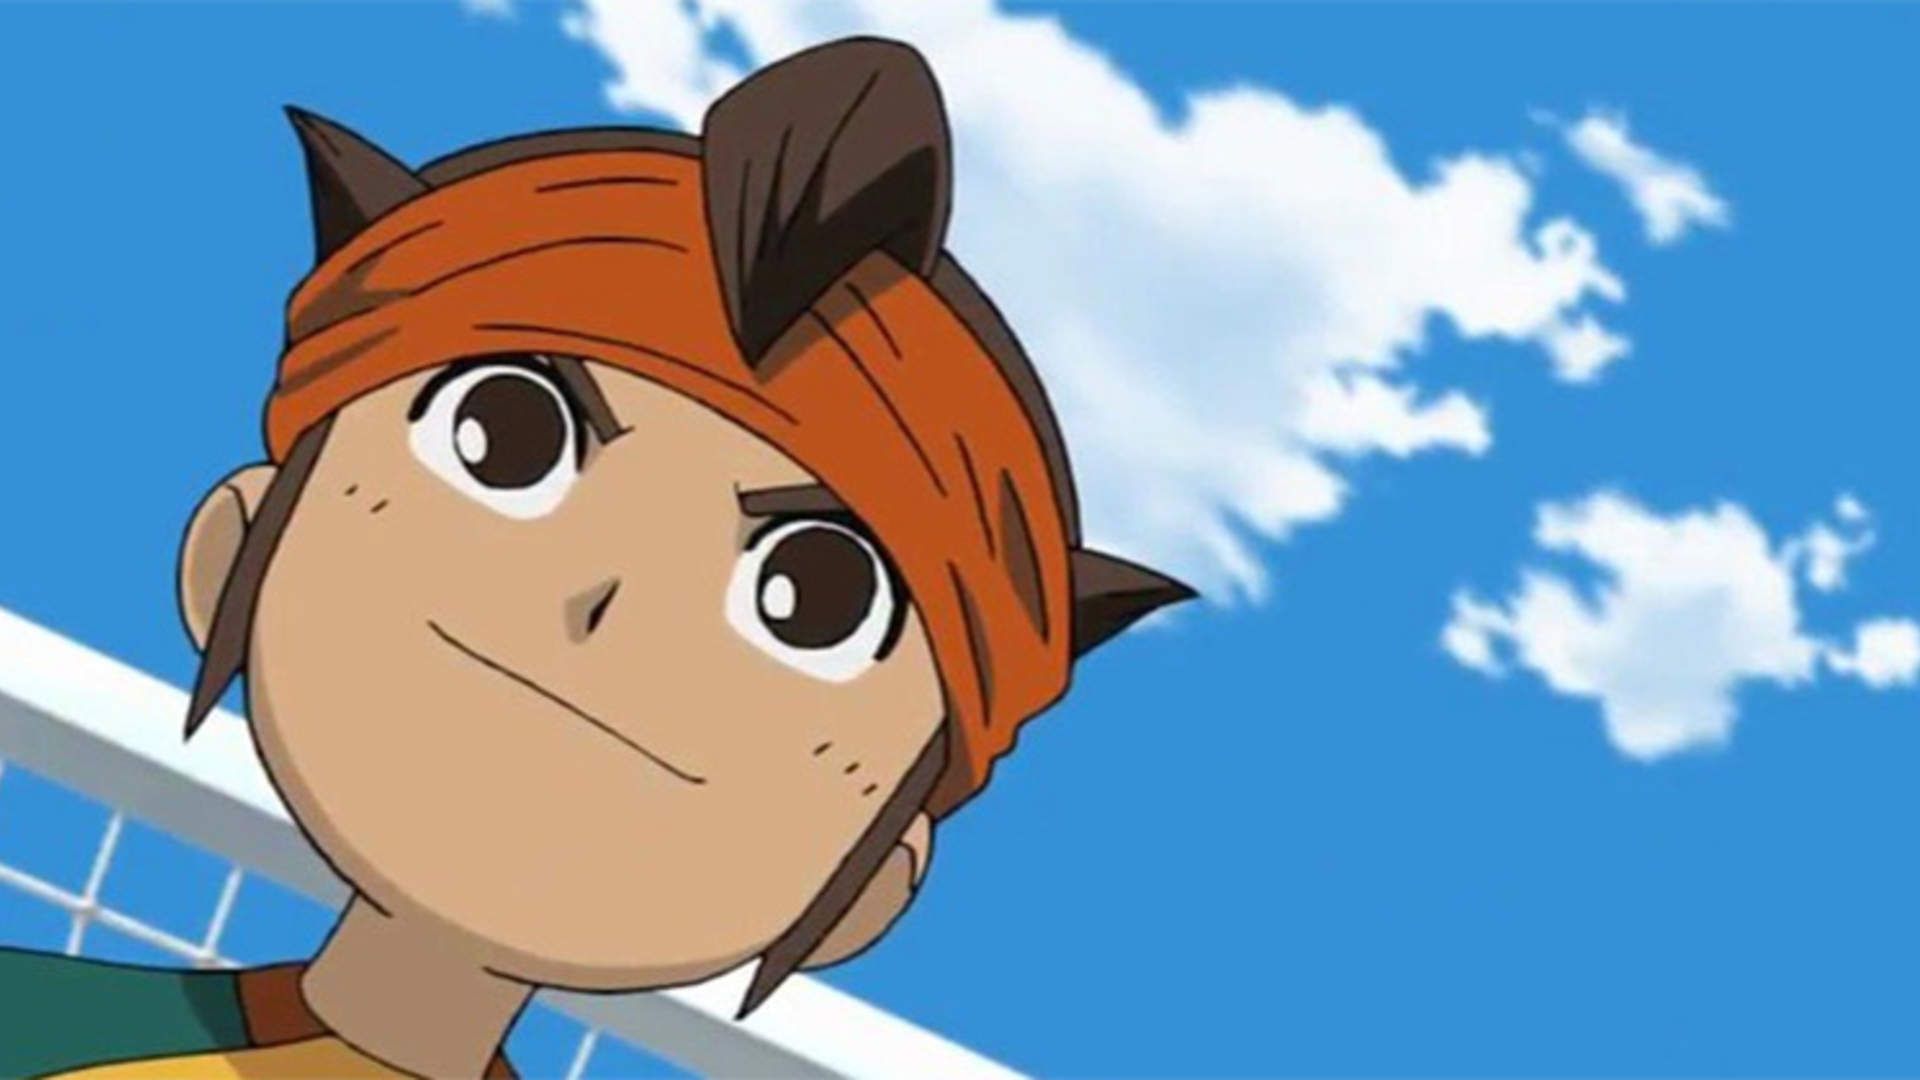 Inazuma Eleven Might be a Kids' RPG, but its Soccer Strategies Require a Fully Developed Brain